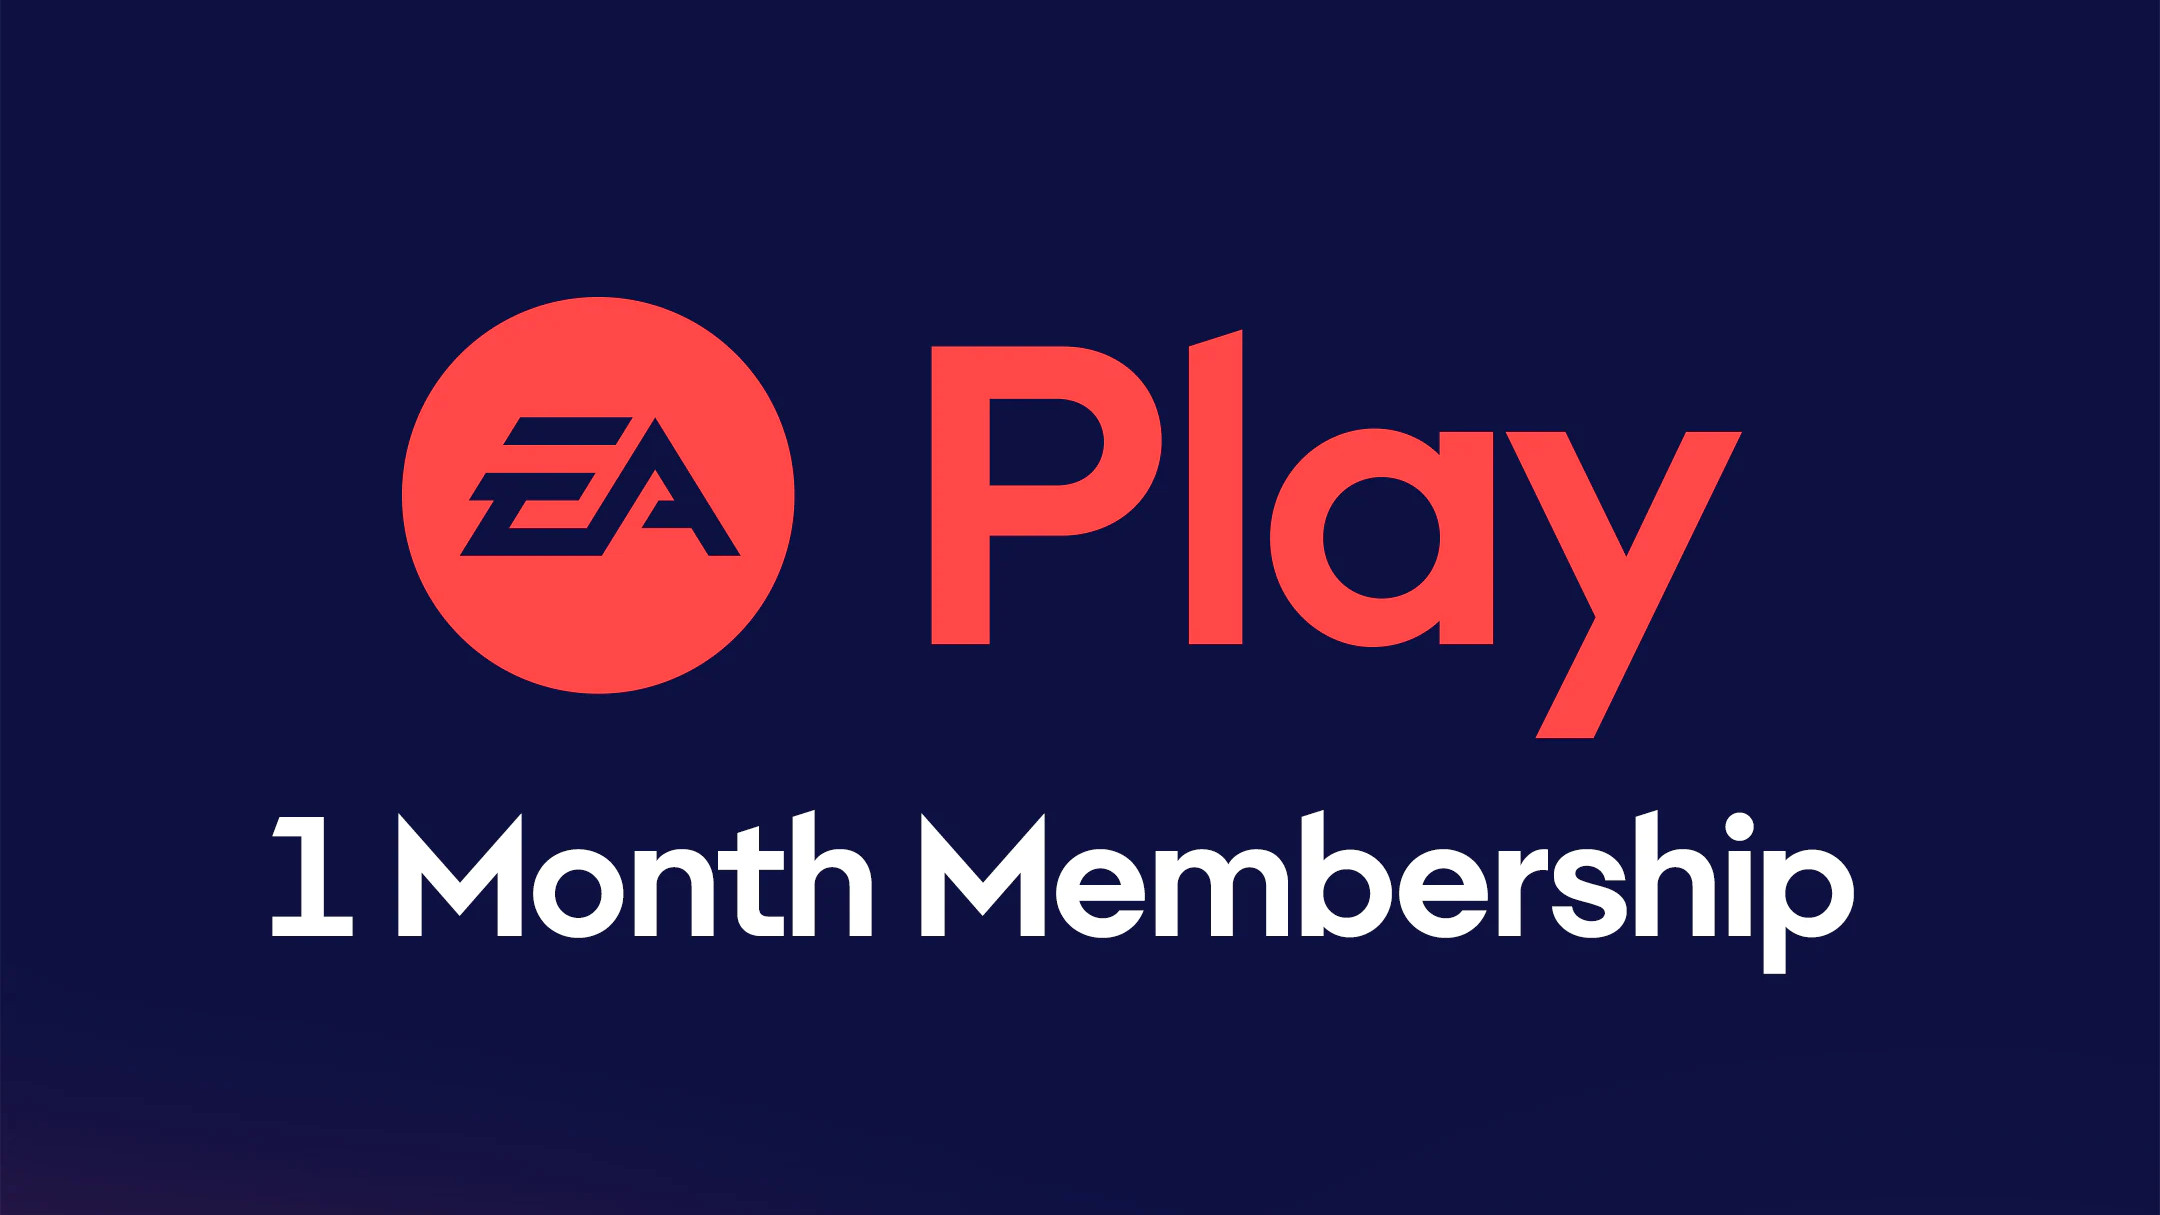 EA Play - 1 Month Subscription Key 20.31 $